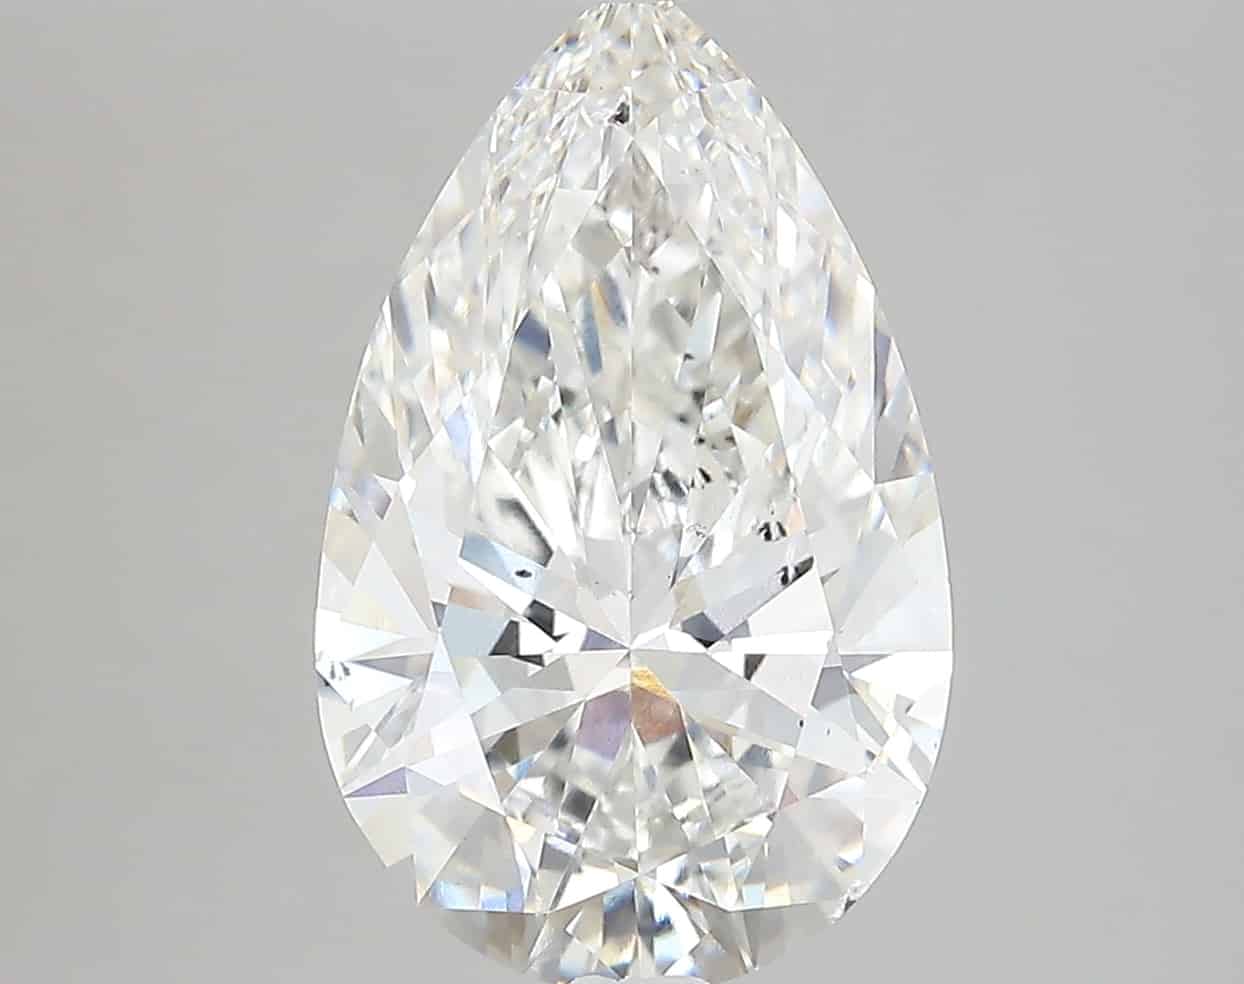 Lab Grown 3.45 Carat Diamond IGI Certified si1 clarity and G color